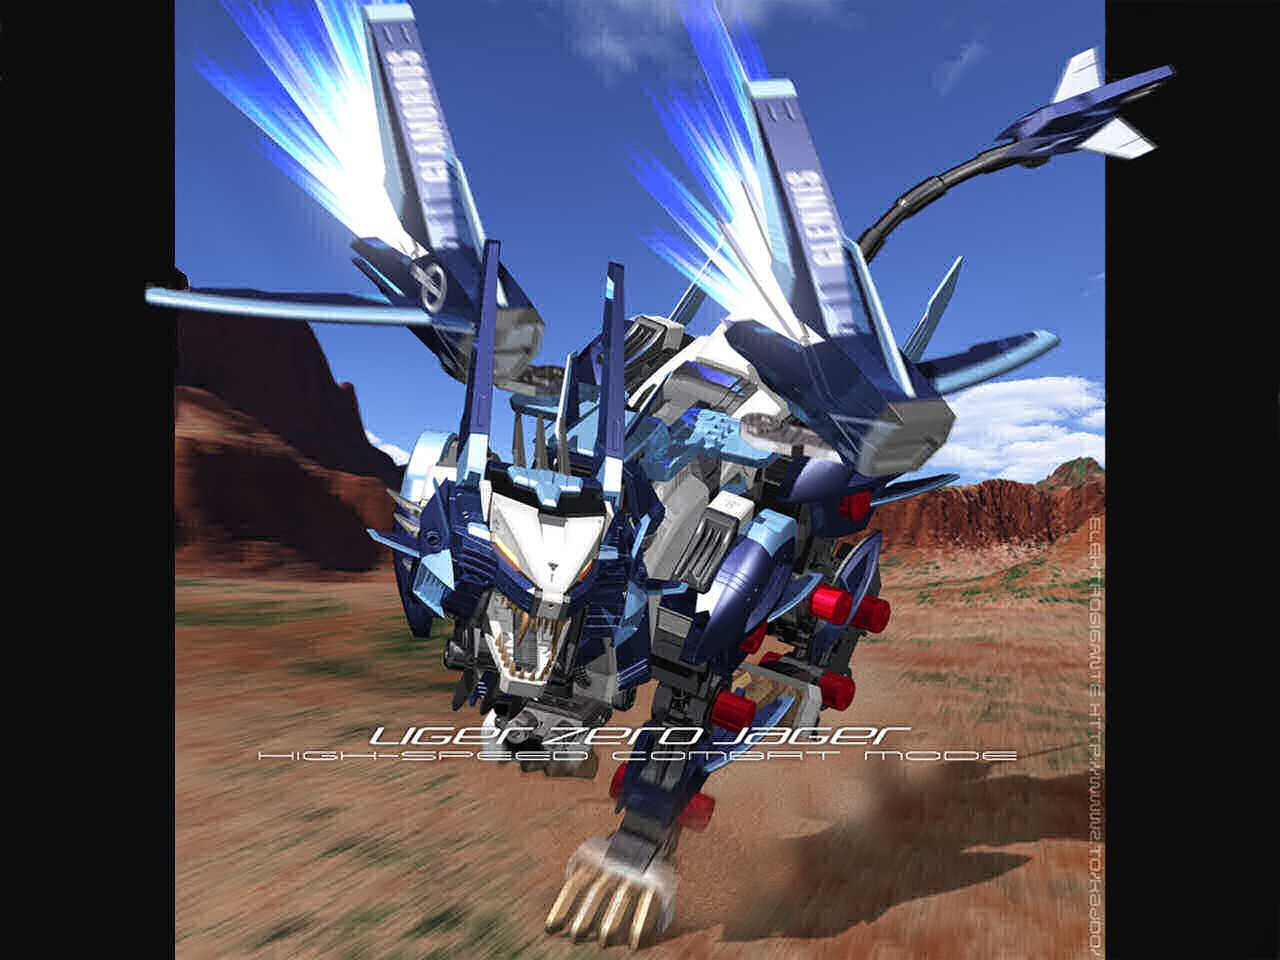 Cool Zoids Wallpapers